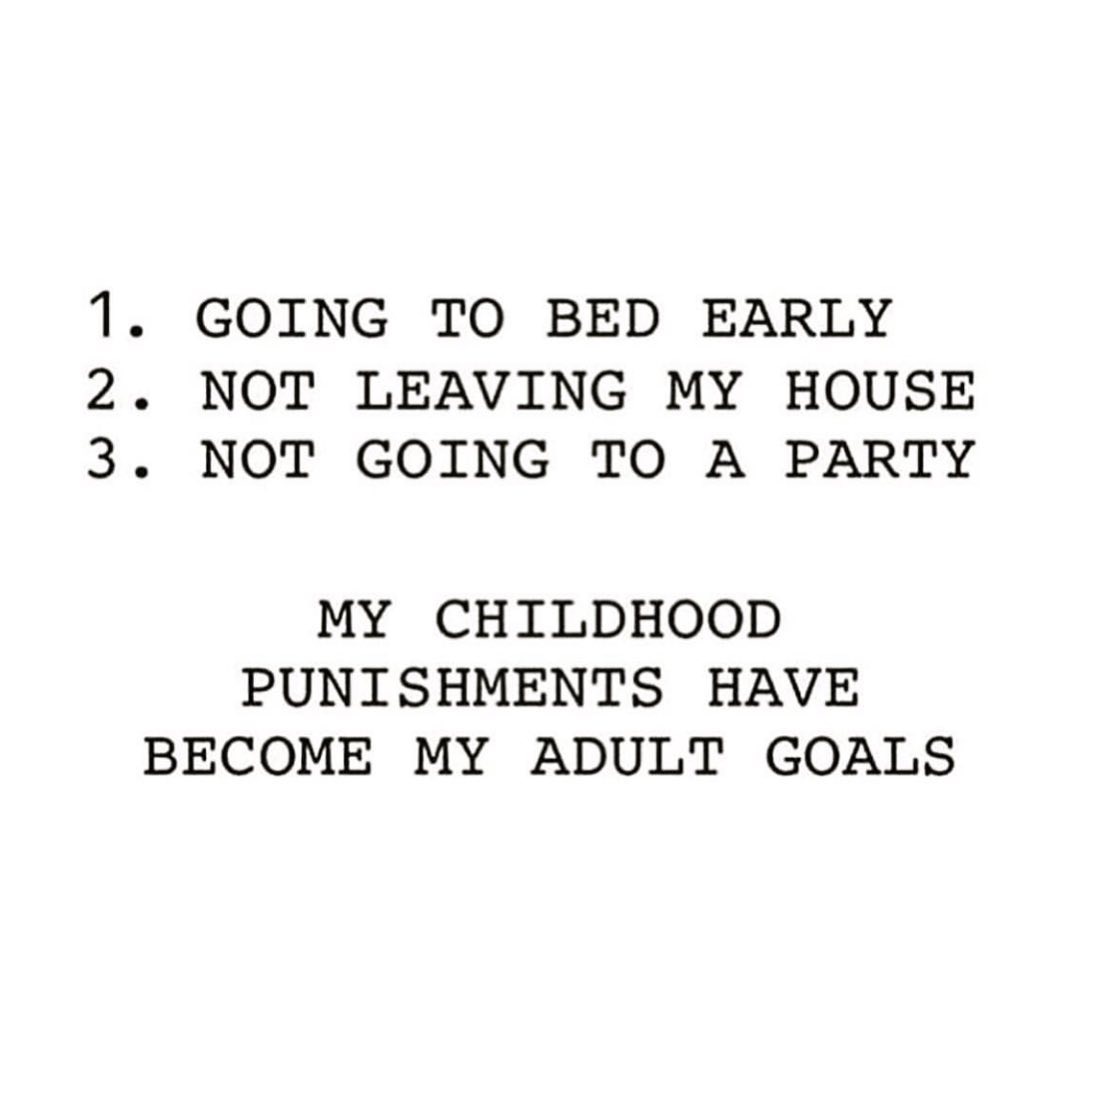 image that reads: 1. Going to bed early 2. Not leaving my house 3. Not going to a party. My childhood punishments have become my adult goals